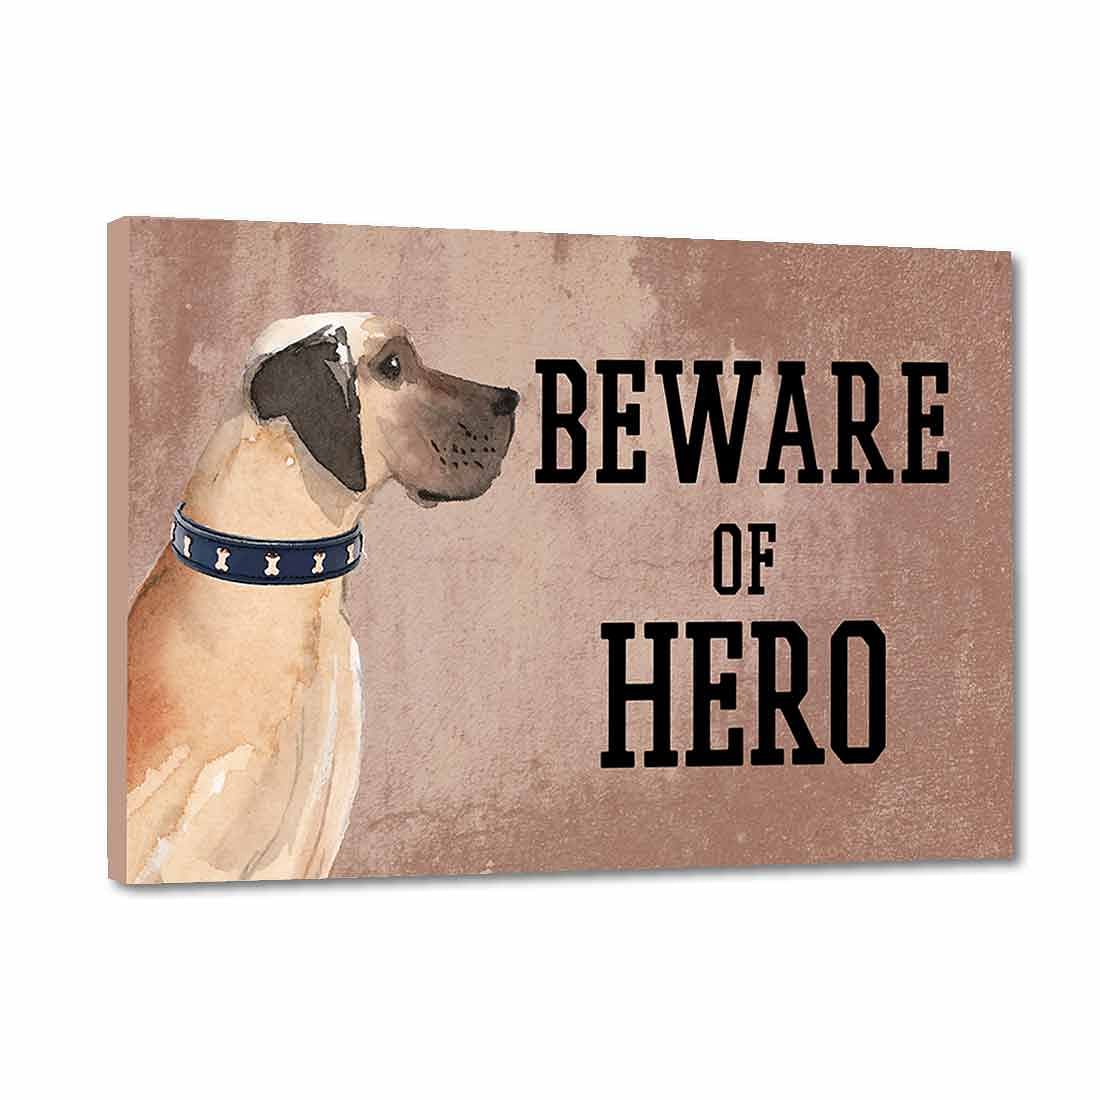 Personalized Dog Name Plates Beware Of Dog Sign - Great Dane Nutcase